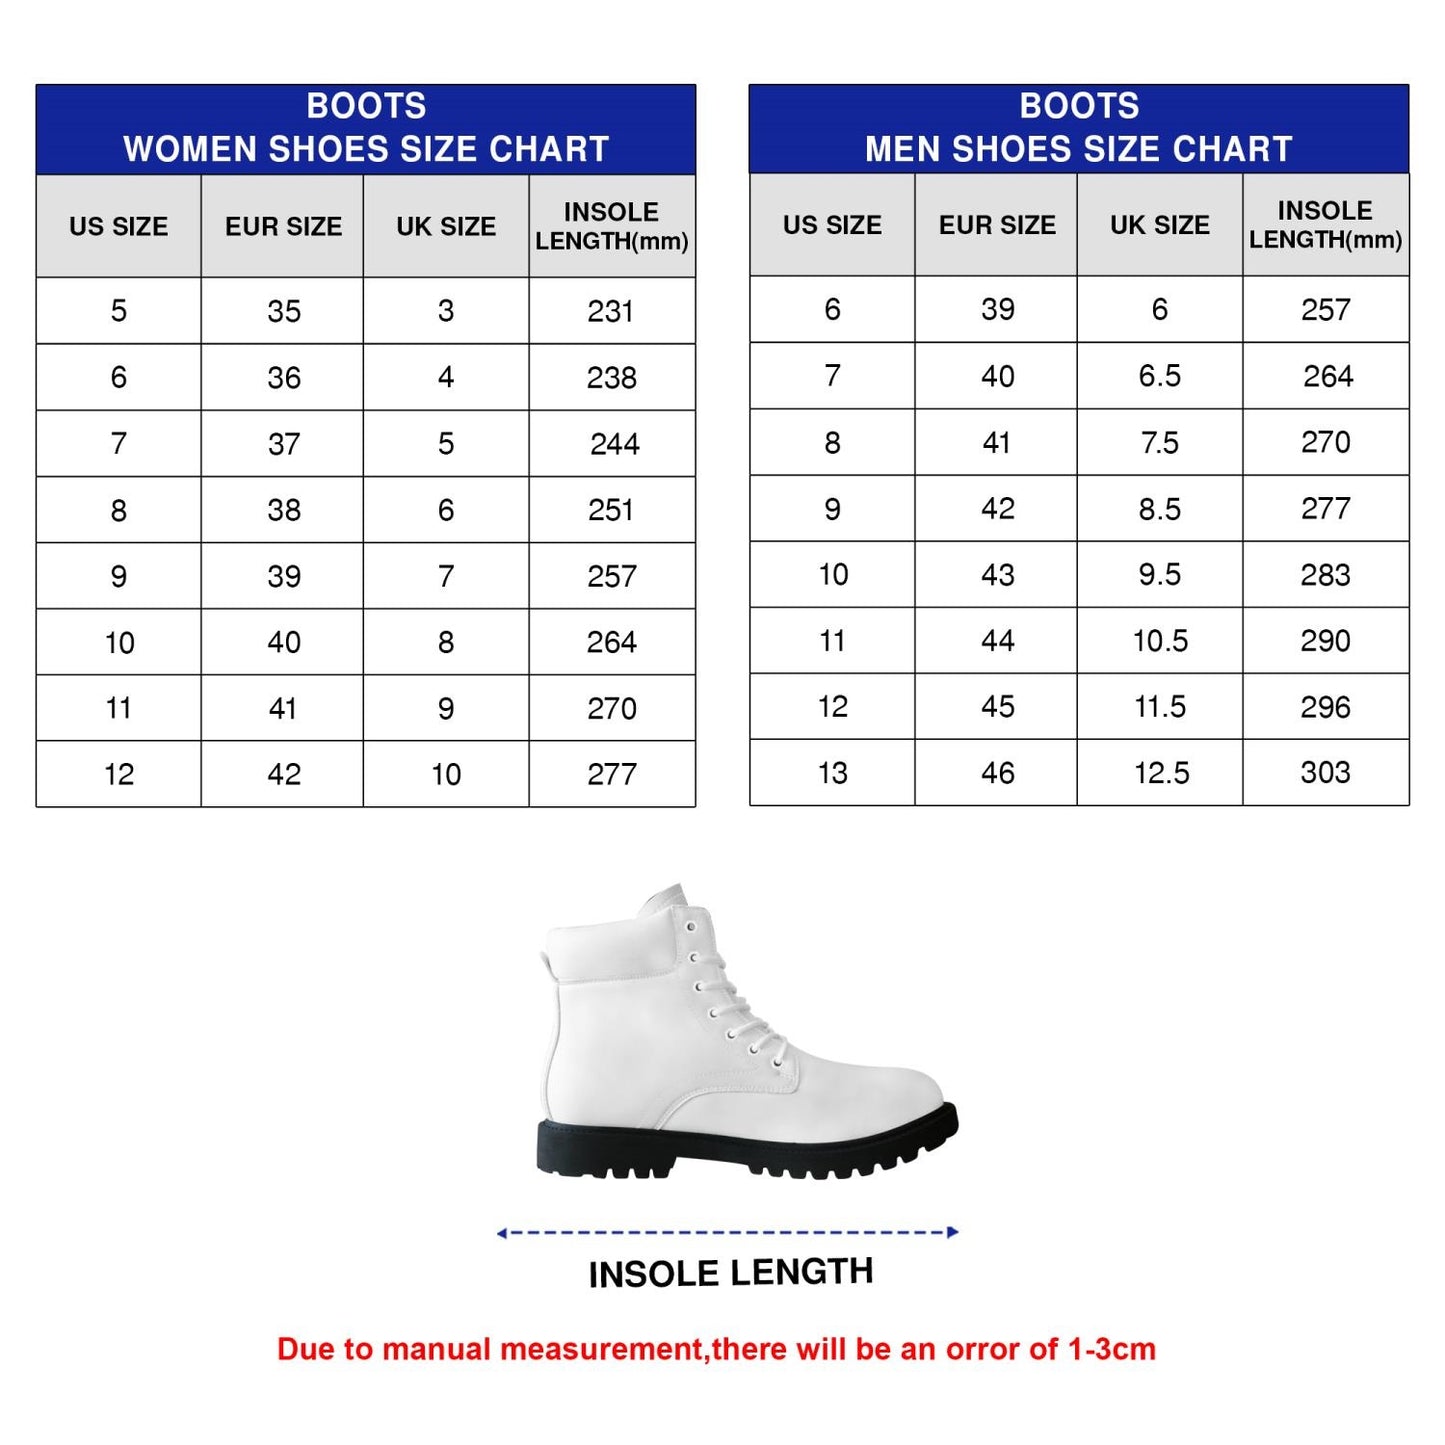 Jesus Tbl Boots Black Sole 1 - Christian Shoes For Men And Women